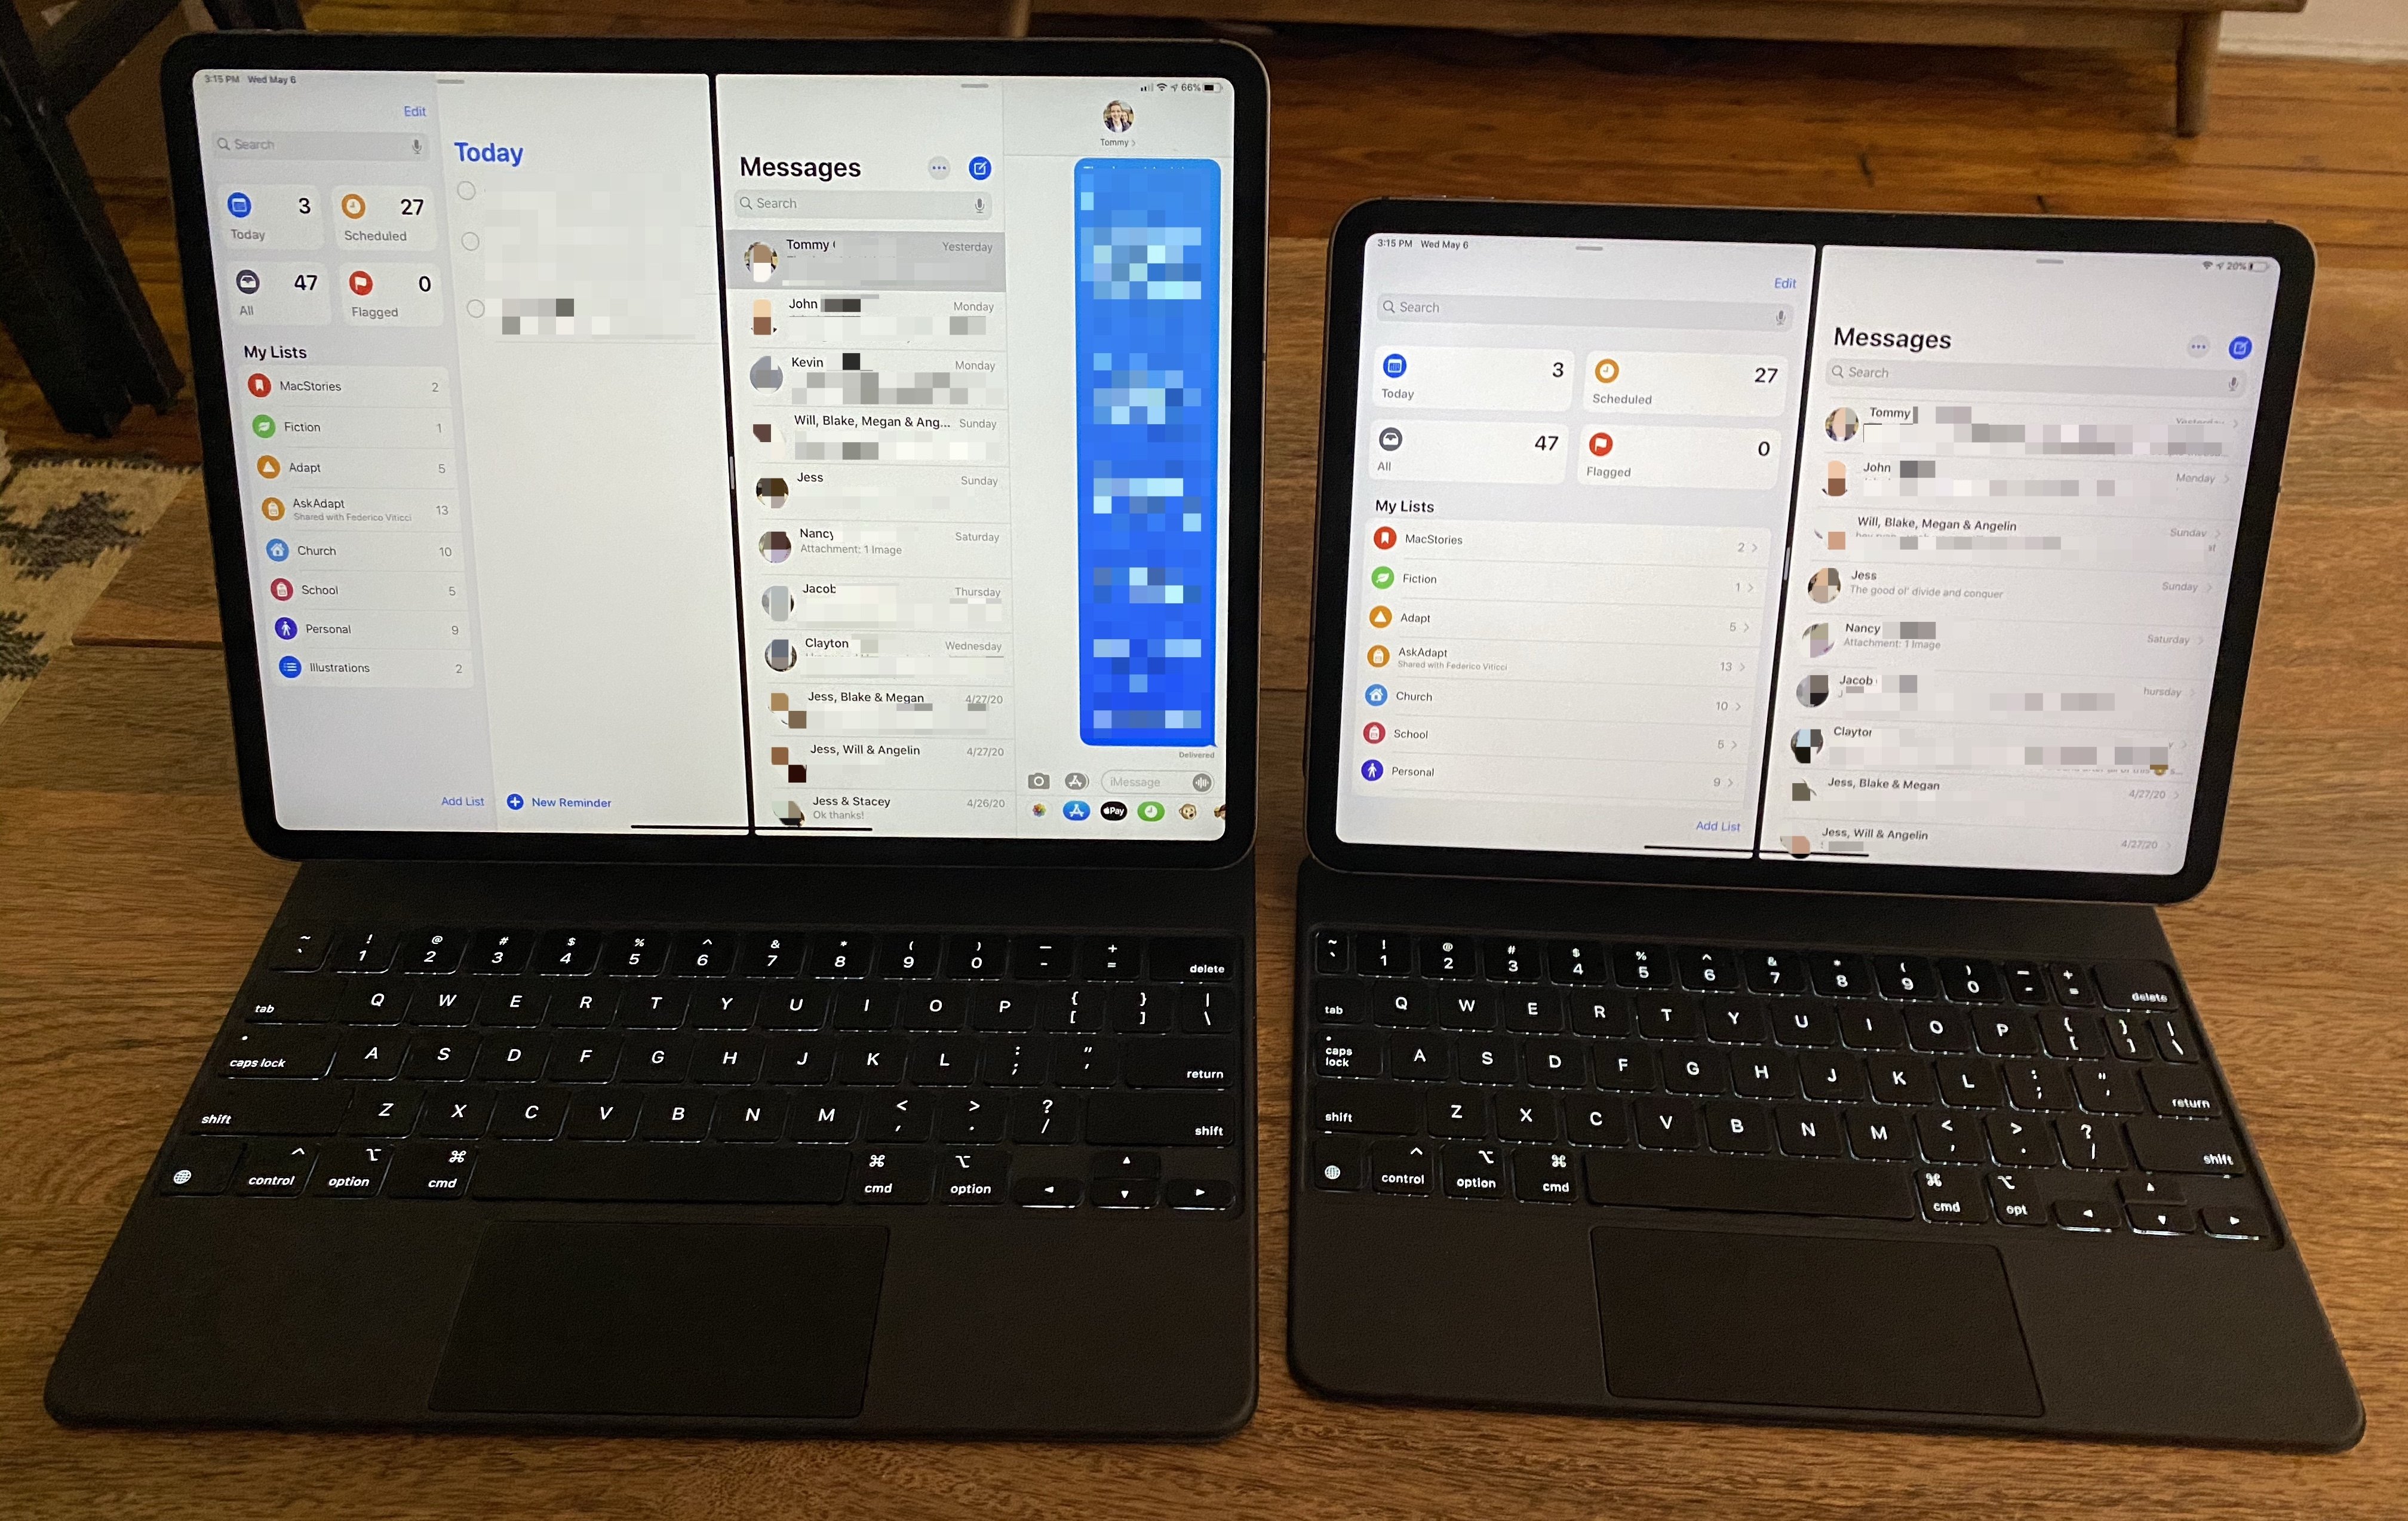 The larger iPad Pro can display multiple panels per app.